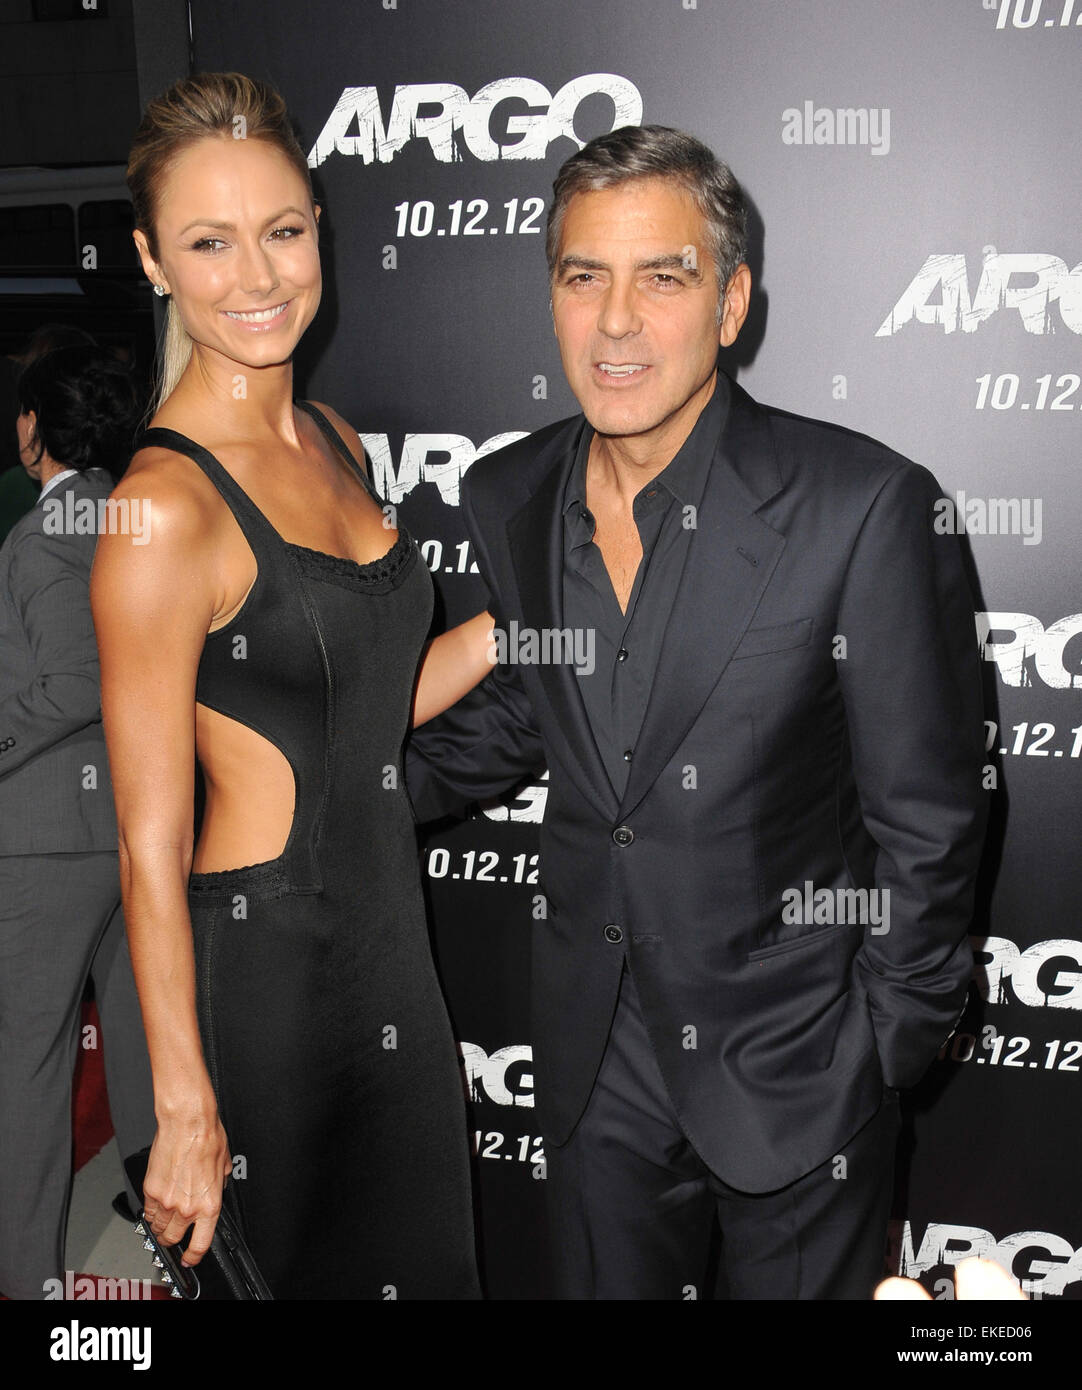 BEVERLY HILLS, CA - OCTOBER 4, 2012: George Clooney & Stacy Keibler at the Los Angeles premiere of 'Argo,' which he produced, at the Samuel Goldwyn Theatre, Beverly Hills. Stock Photo